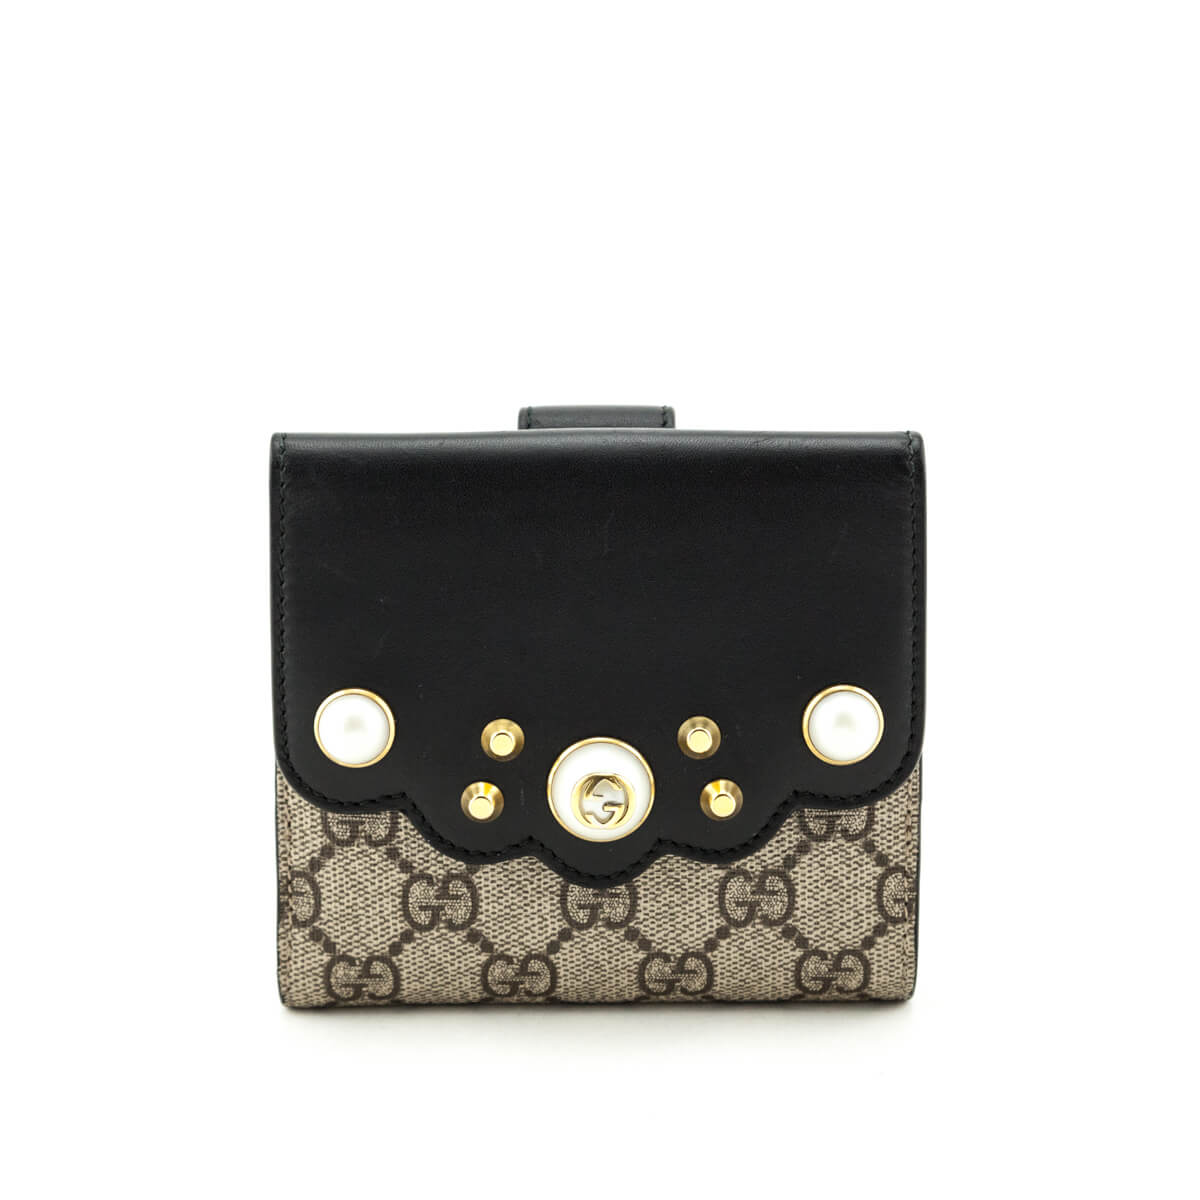 Gucci Beige GG Supreme Monogram Pearl Studded Compact Wallet - Love that Bag etc - Preowned Authentic Designer Handbags & Preloved Fashions